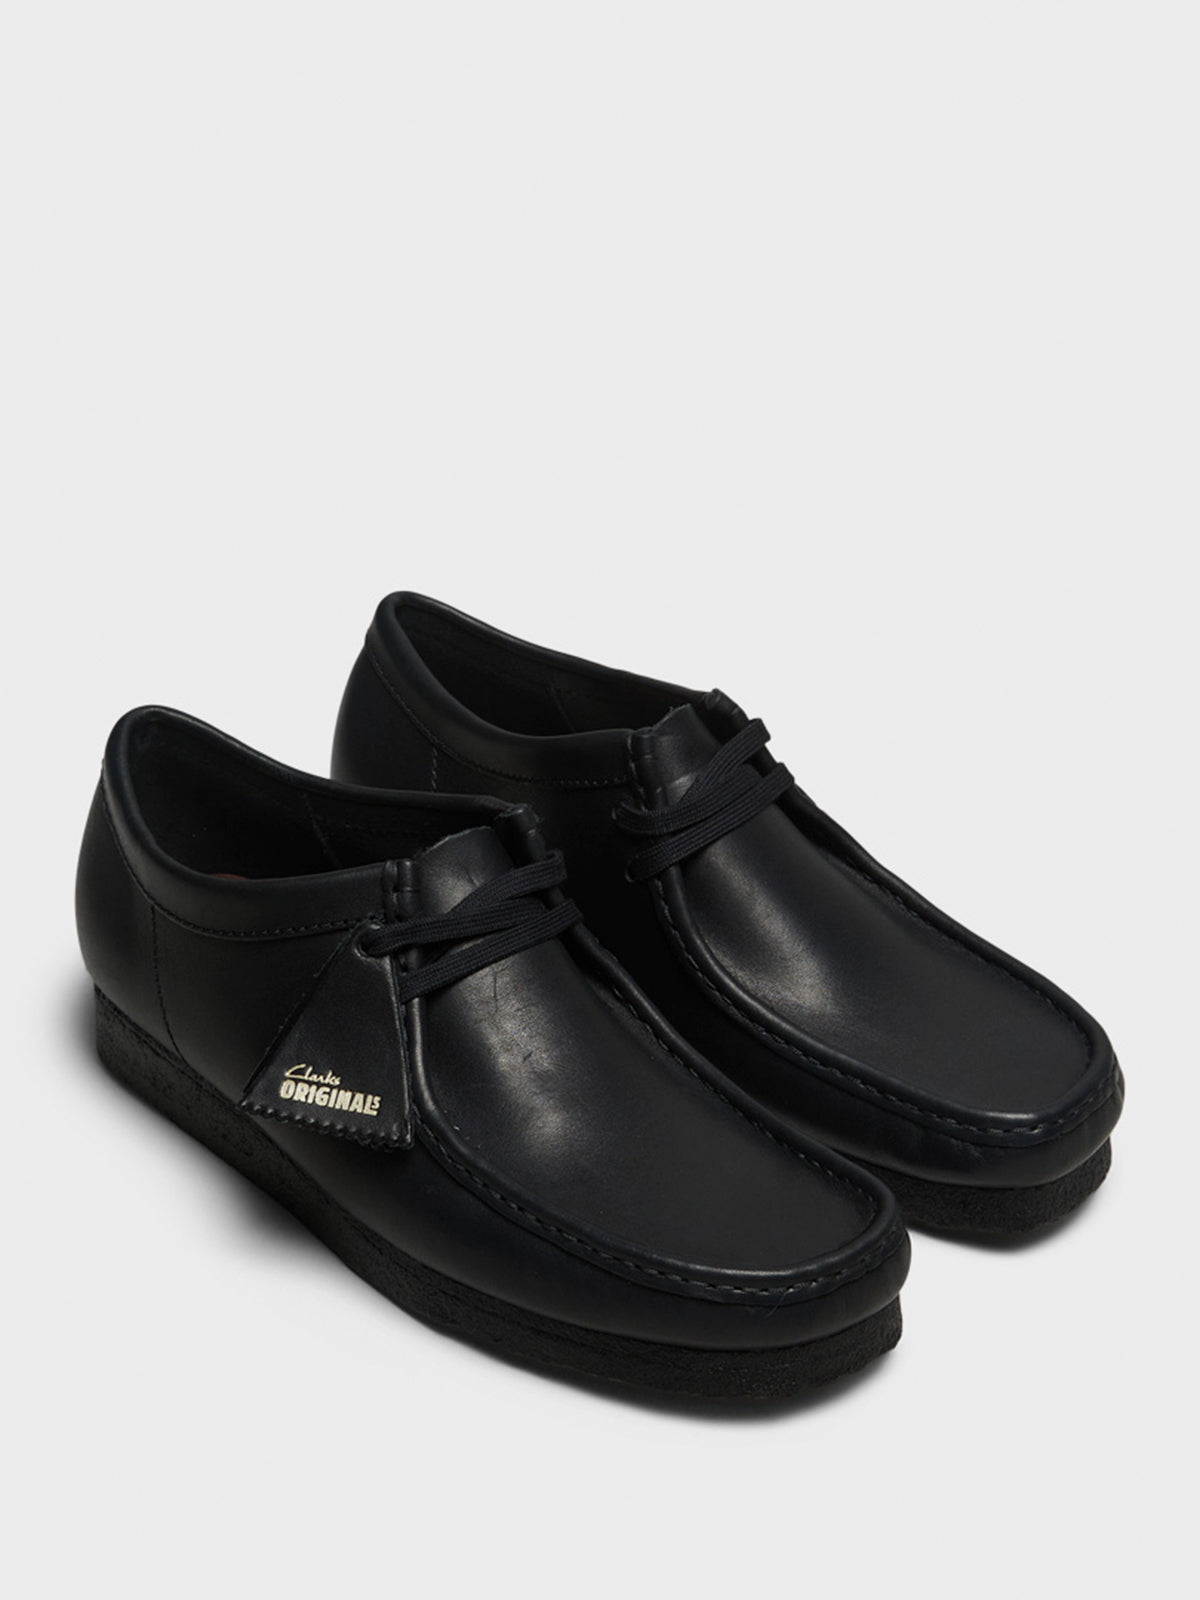 Wallabee Shoes in Black Leather